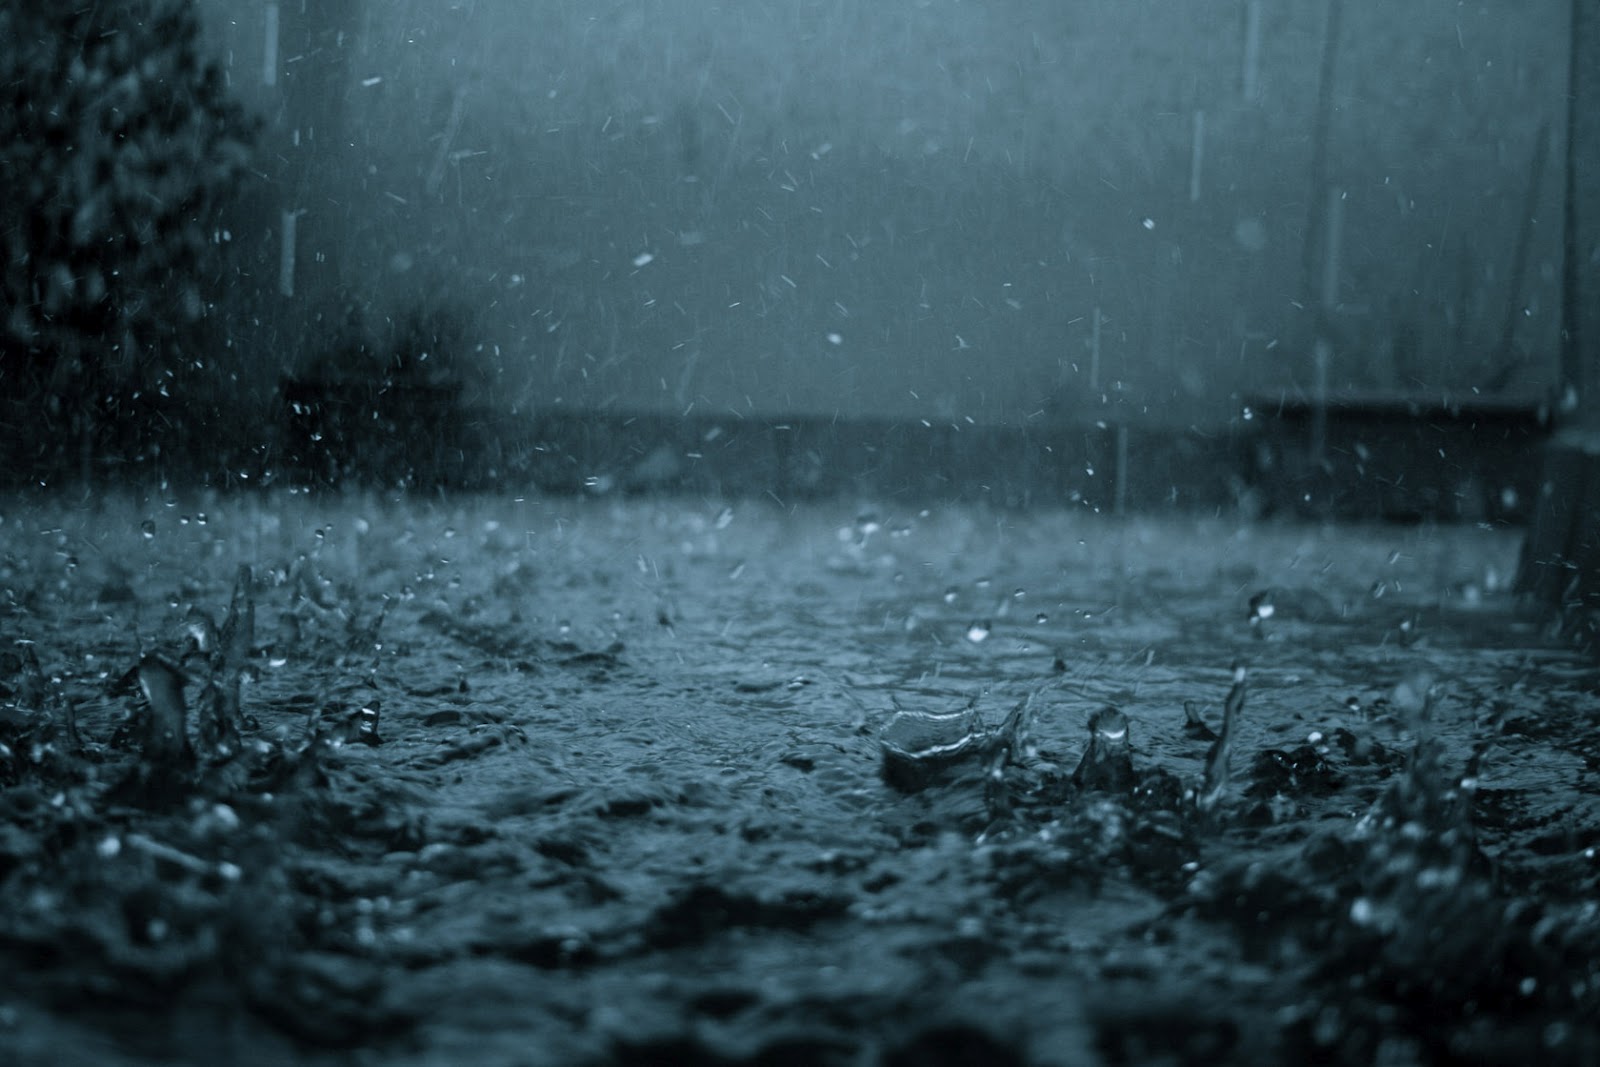  pictures rain pictures alone in rain pictures hd love wallpapers